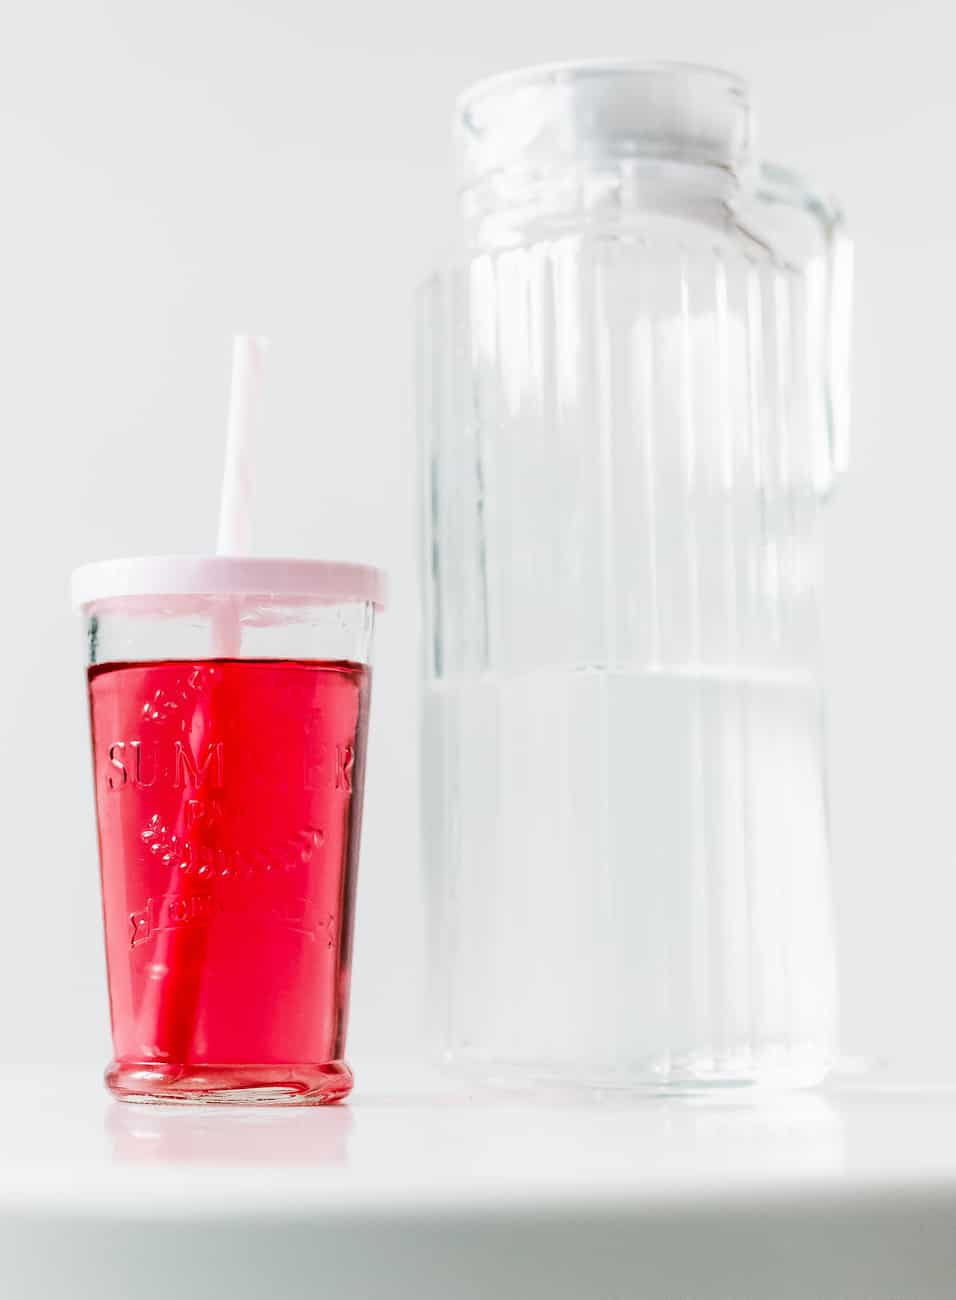 clear red drink in a clear glass glass with a white lid and straw next to a pitcher with water.